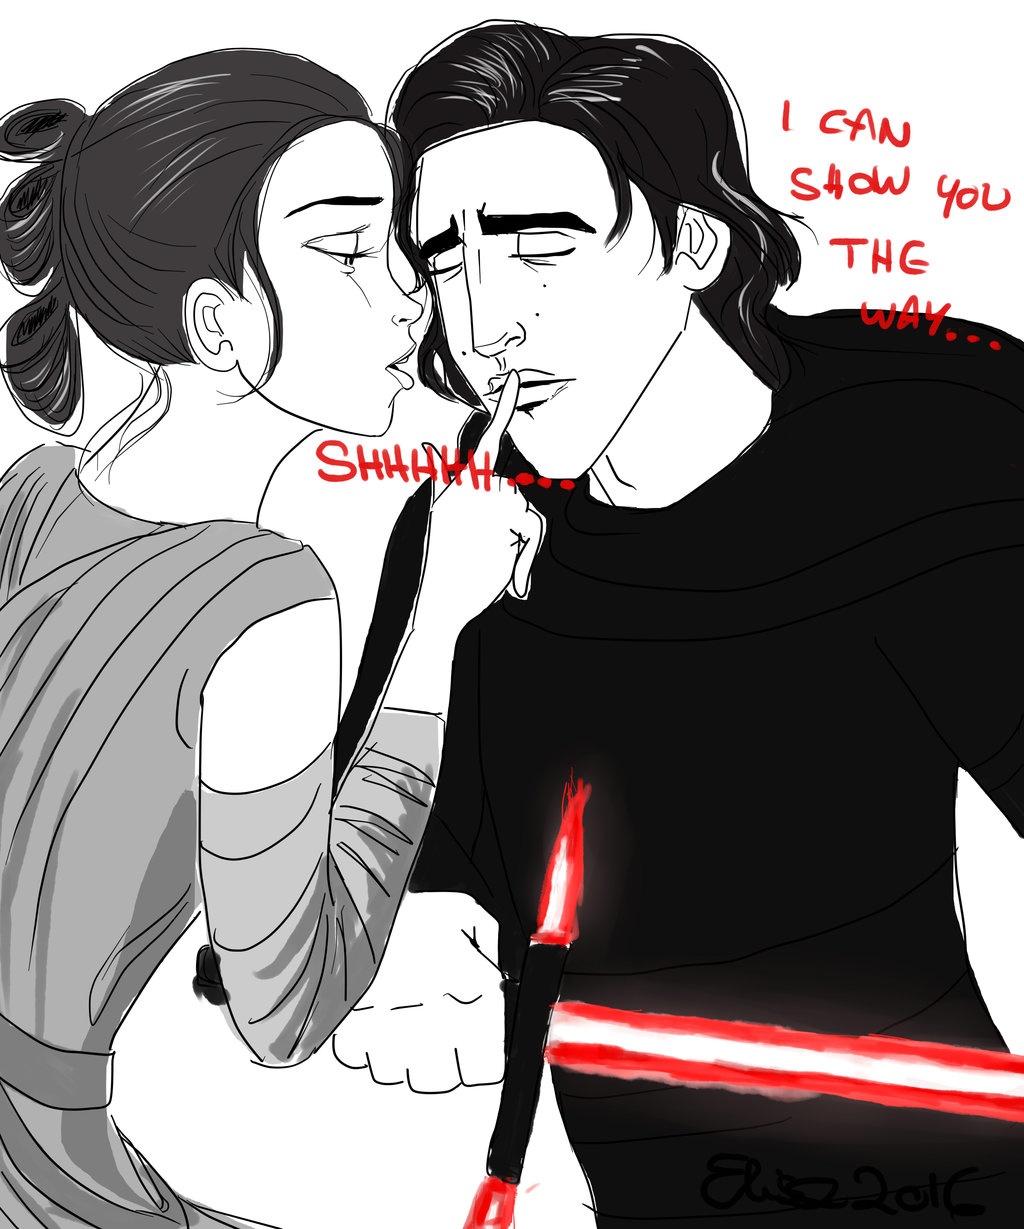 Rey and Kylo Ren by lisuli79 on